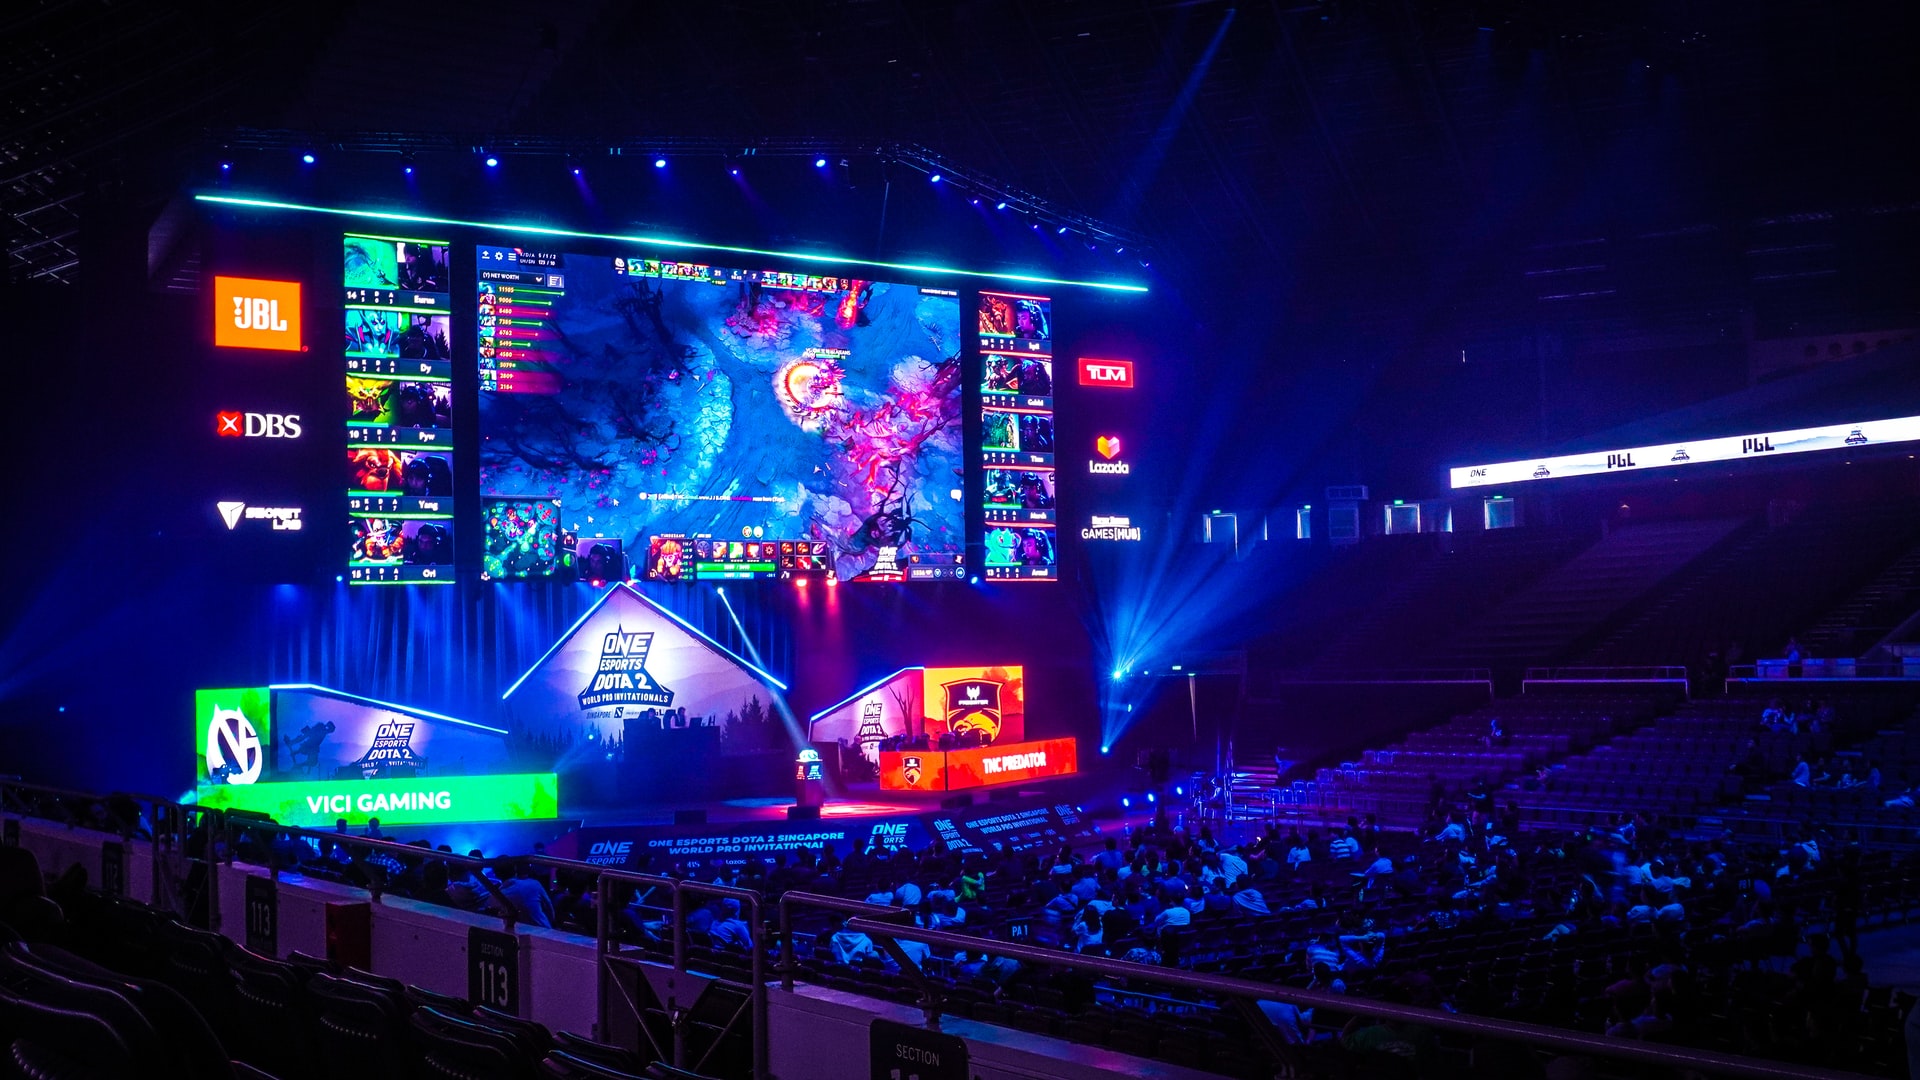 An arena where an esports competition is taking place